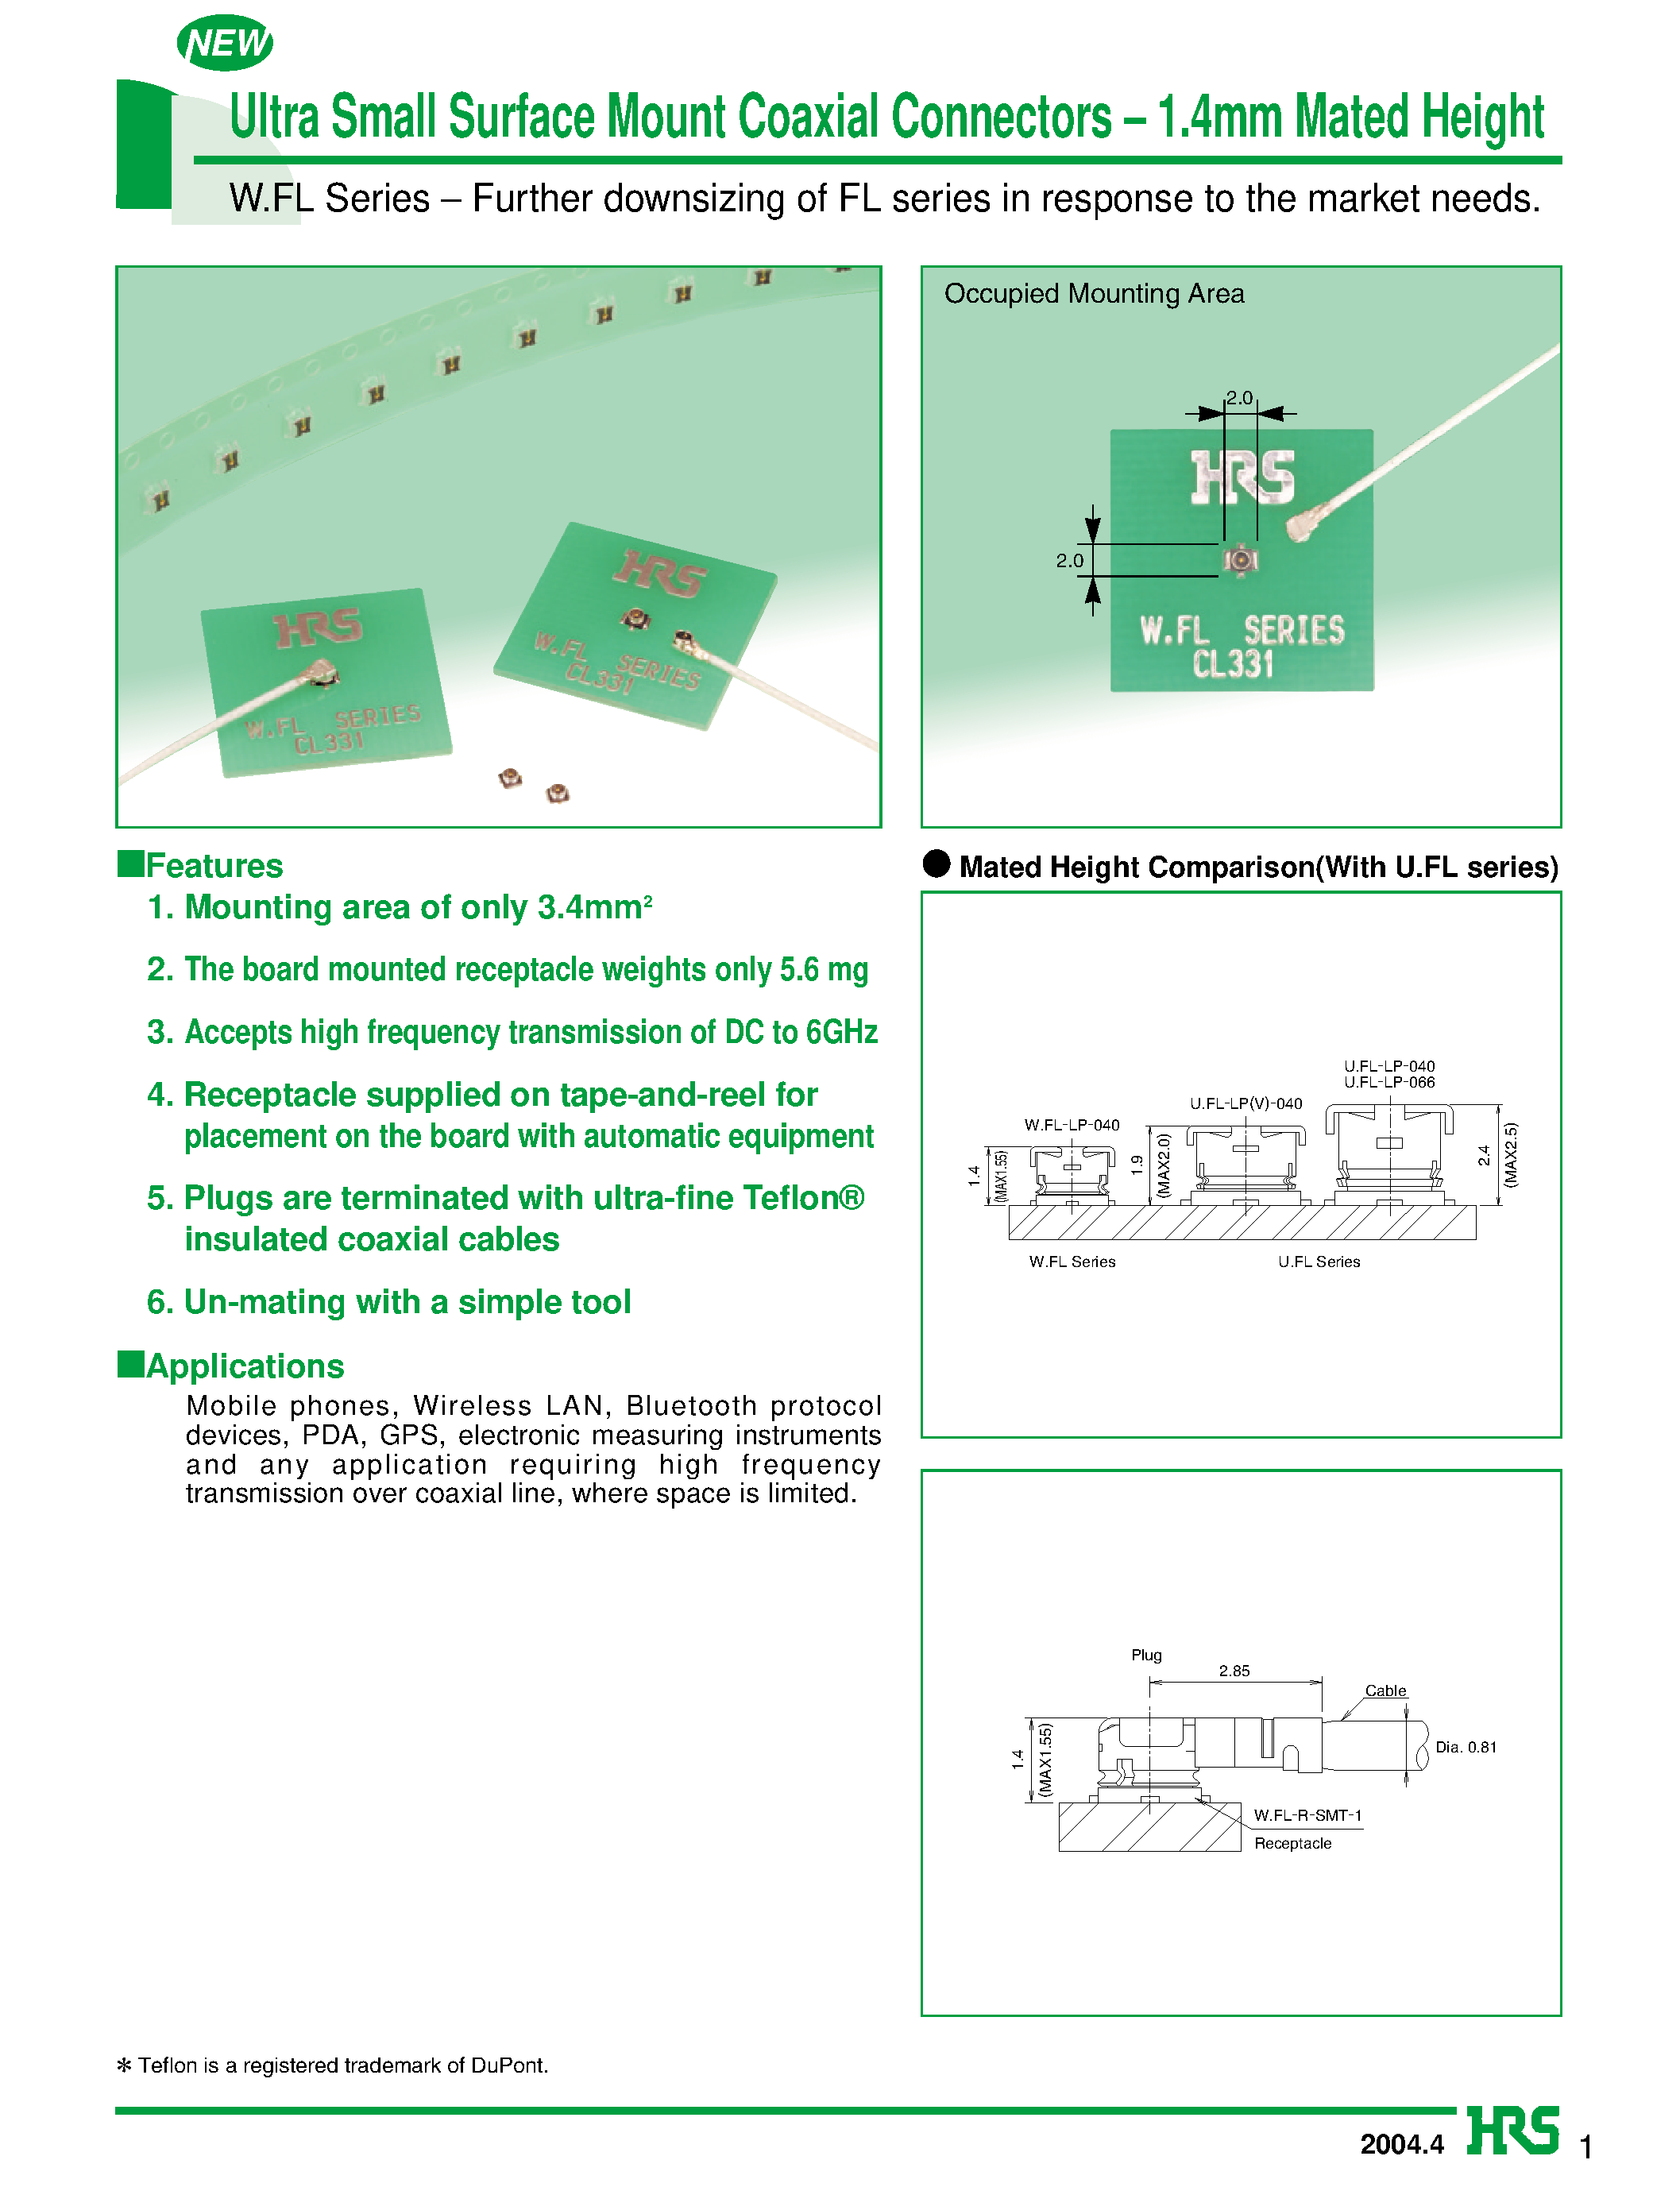 Datasheet HRMJ-W.FLP - Ultra Small Surface Mount Coaxial Connectors - 1.4mm Mated Height page 1